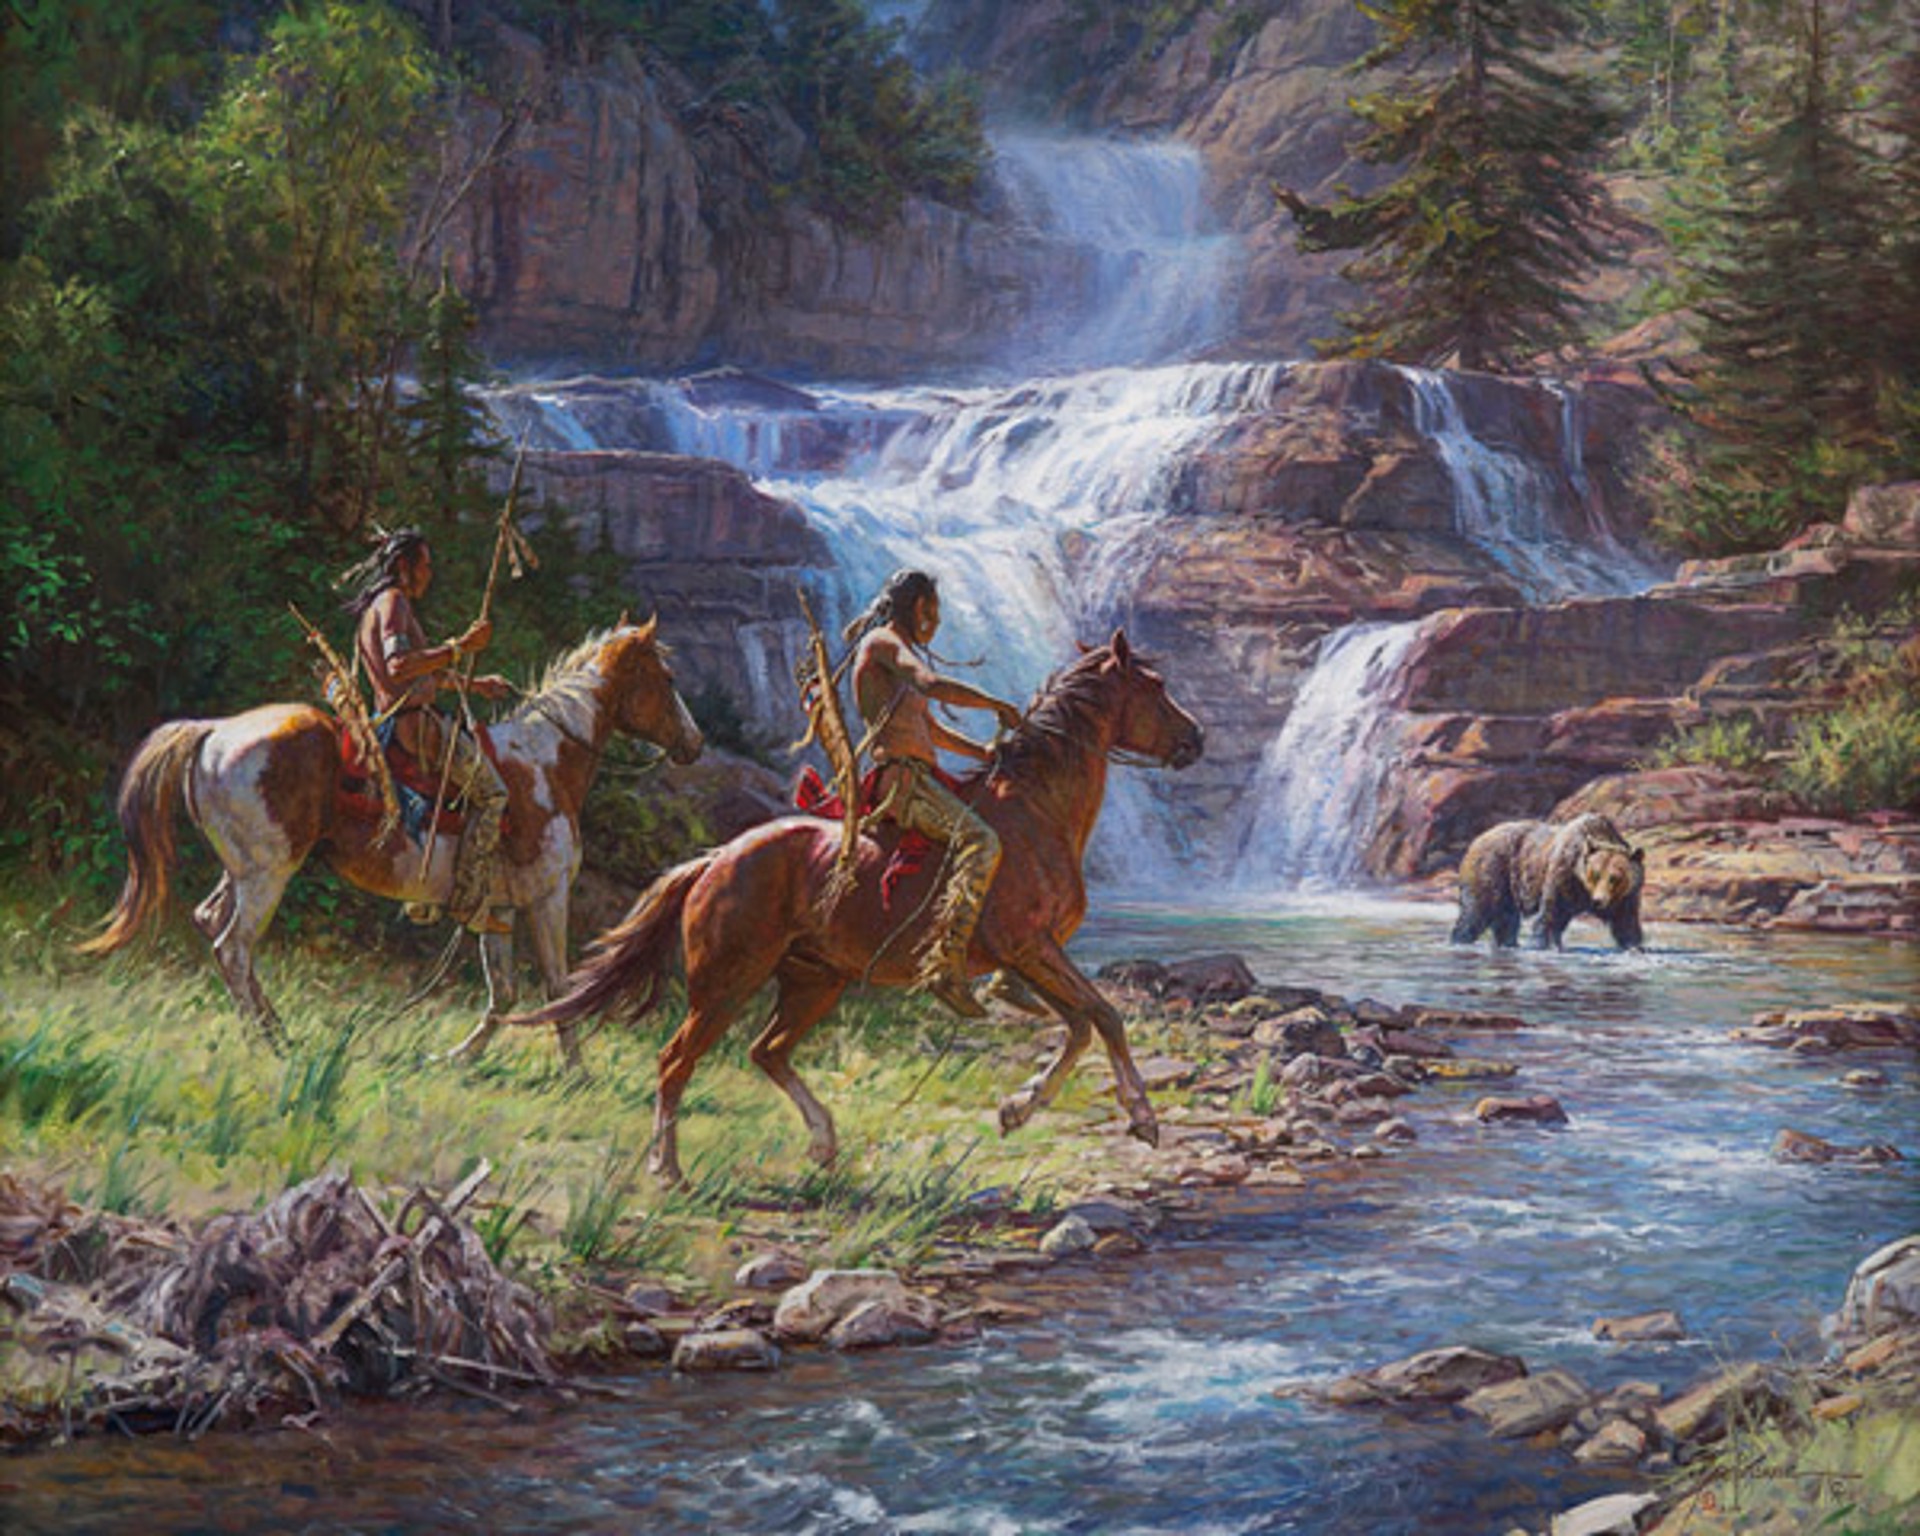 Encounter  at the Falls by Martin Grelle